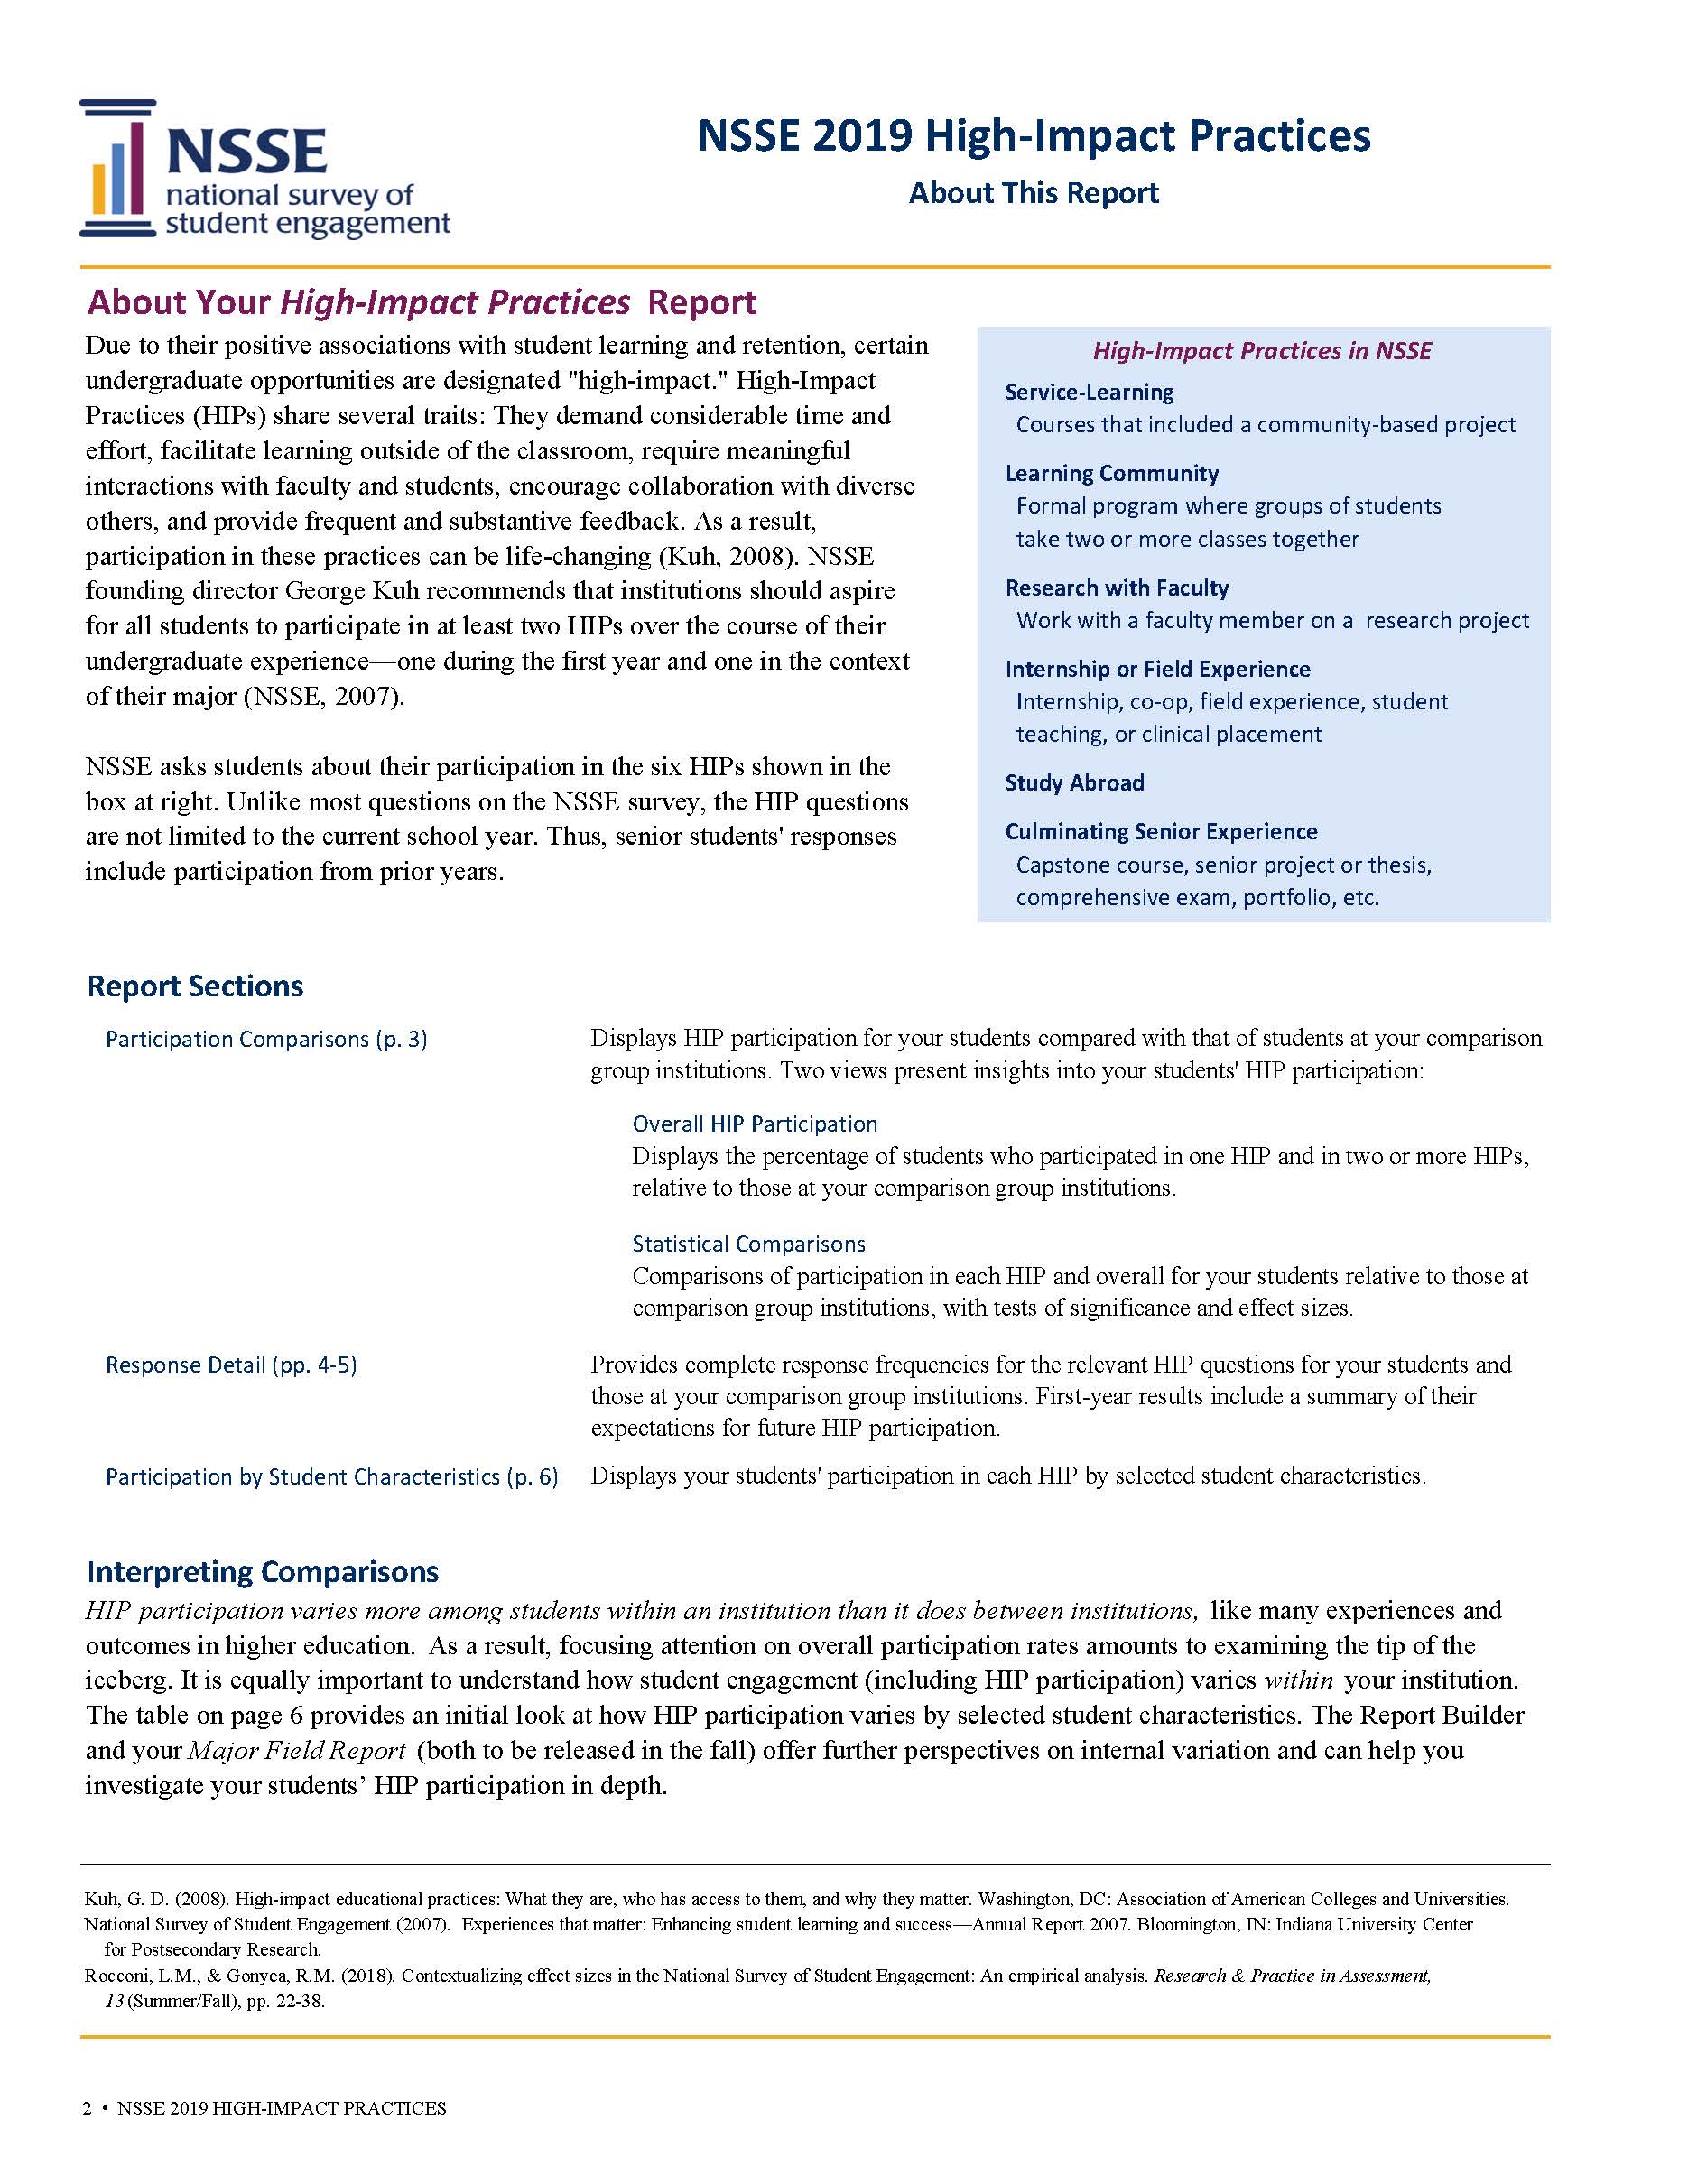 Sample Report: page 2 of NSSE High-Impact Practices